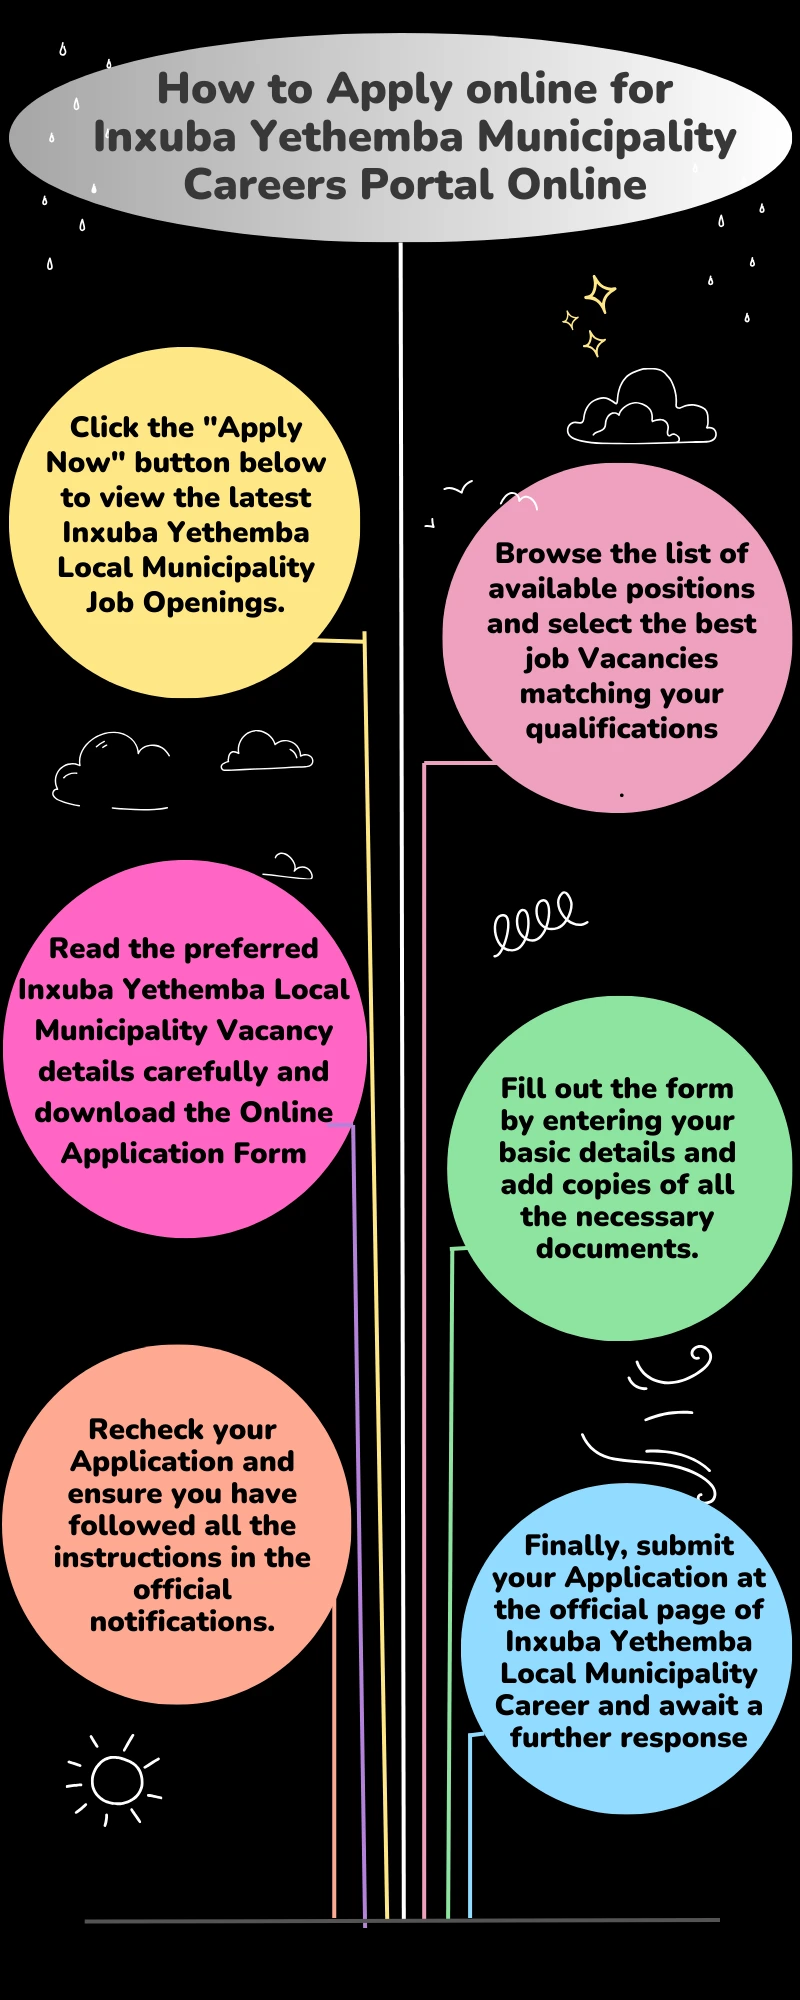 How to Apply online for Inxuba Yethemba Municipality Careers Portal Online